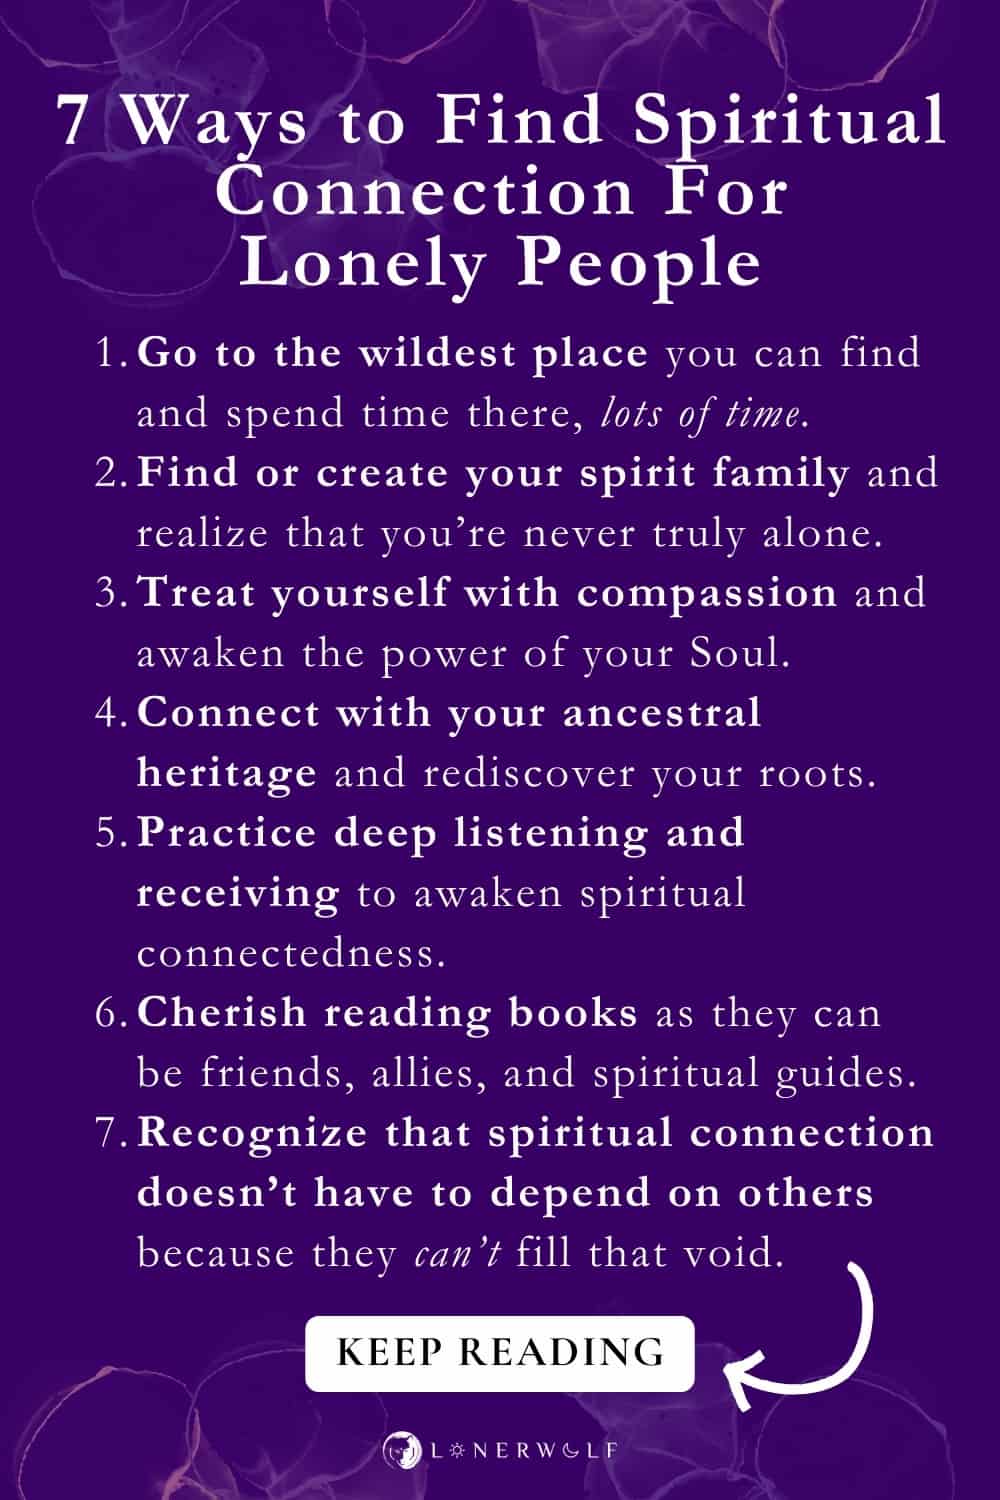 Spiritual Connection & Loneliness: 7 Ways to Feel Kinship